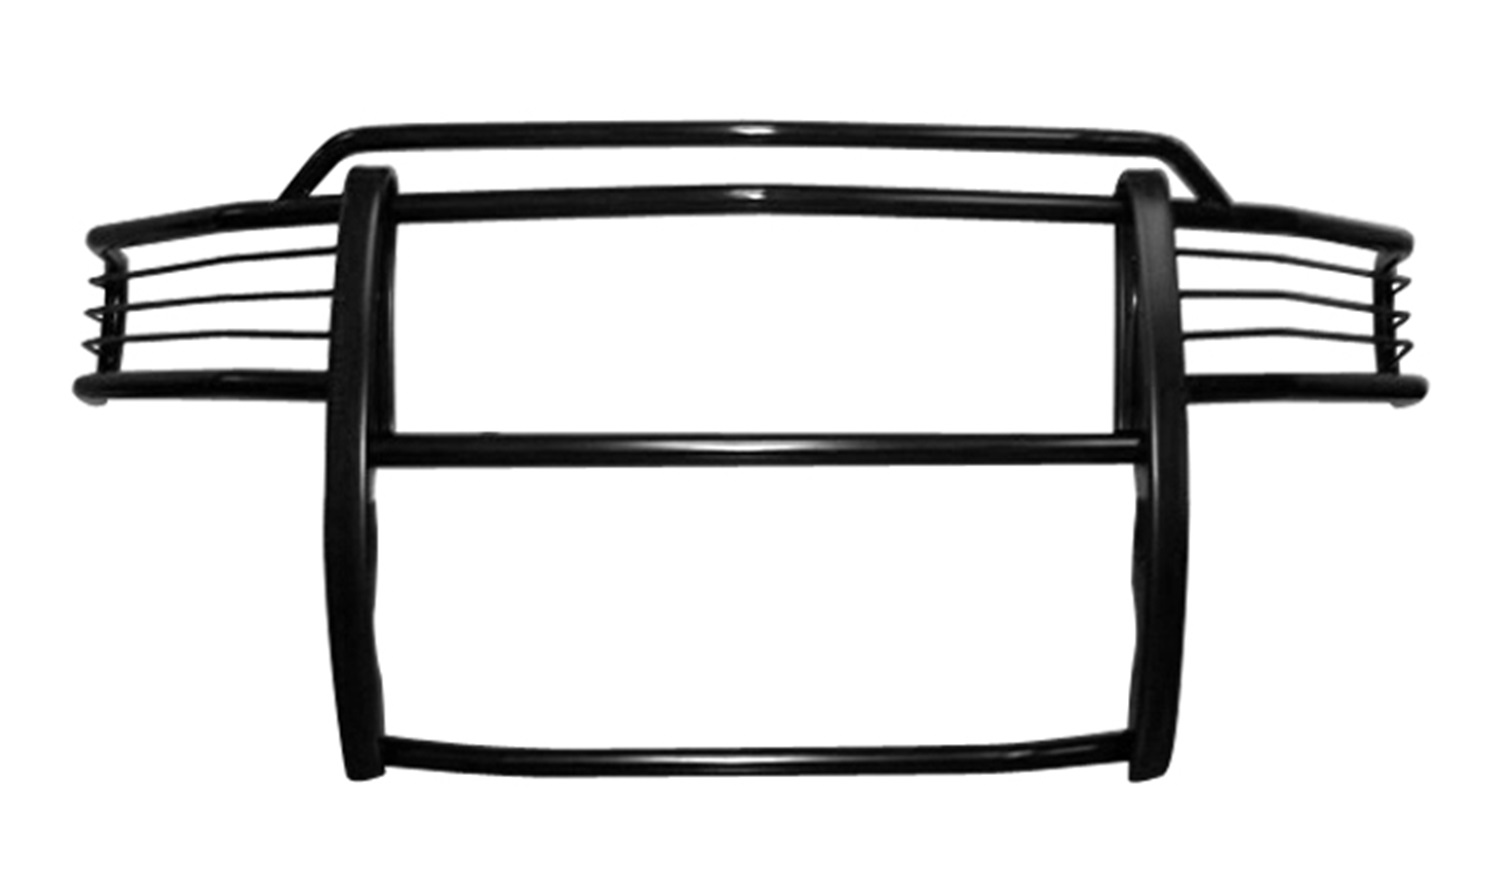 Aries Offroad Aries Offroad 5046 The Aries Bar; Grille/Brush Guard Fits Ram 2500 Ram 3500